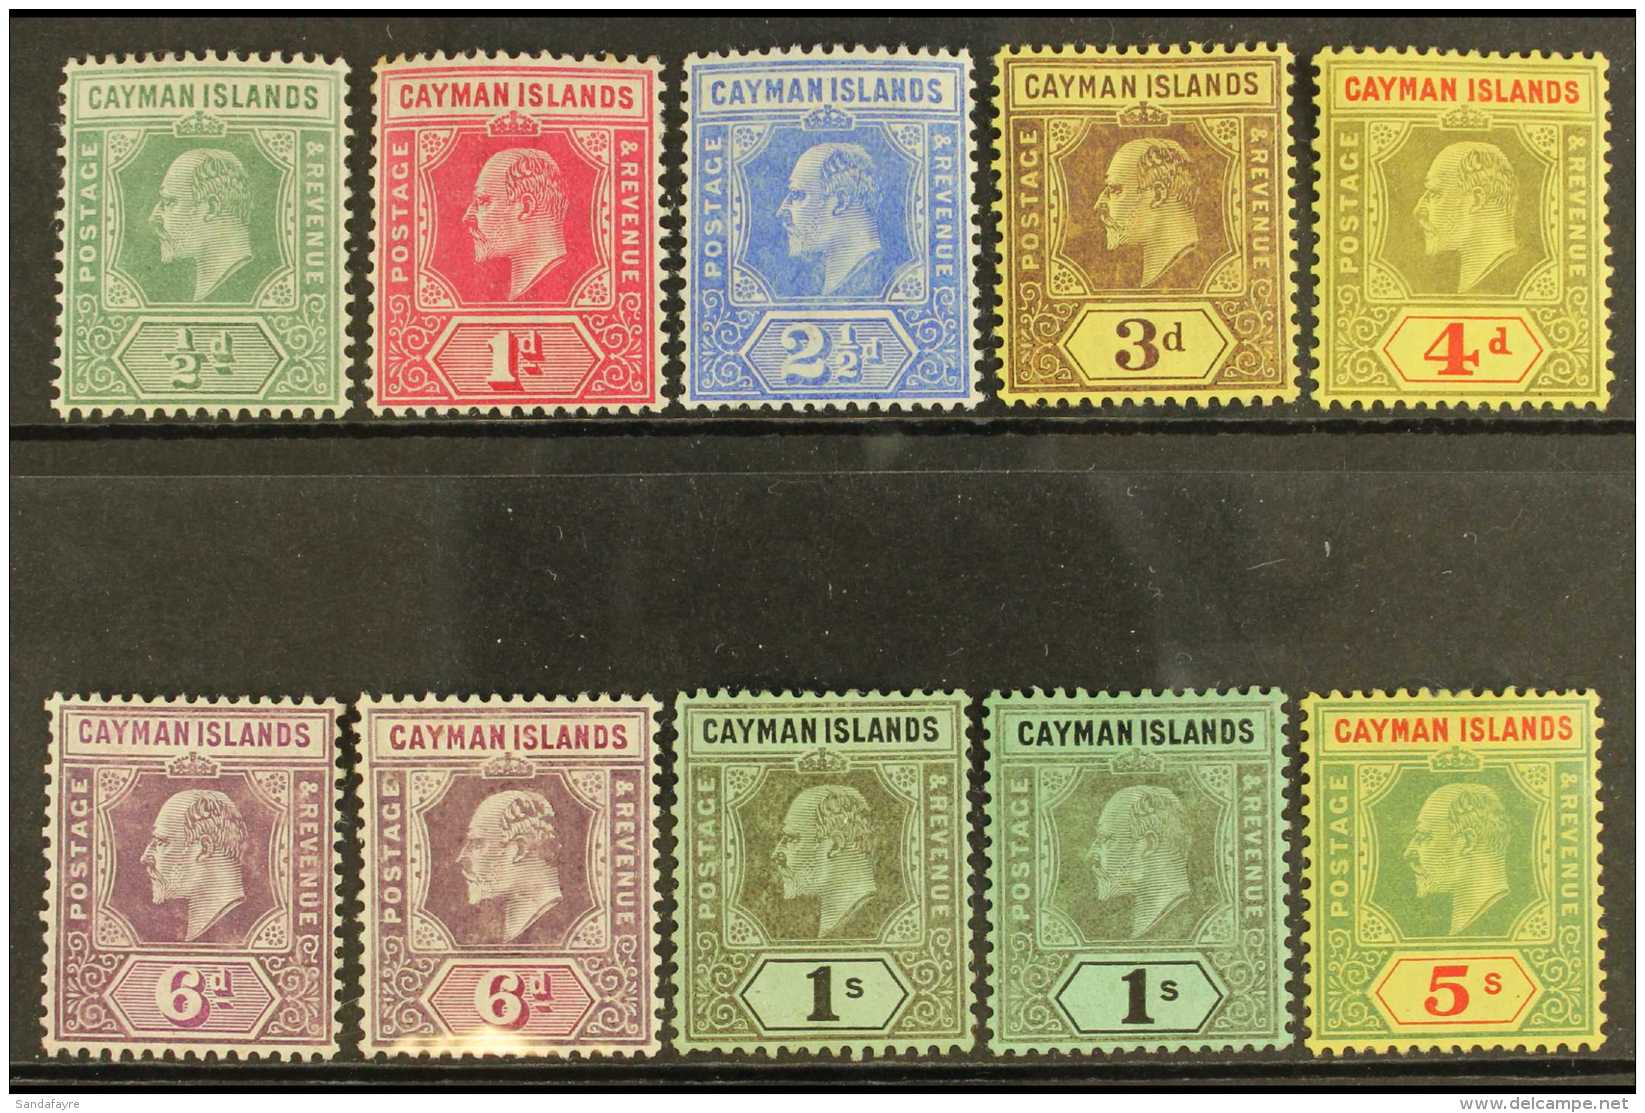 1907-09 KEVII Set To 5s, SG 25/33, Including 6d Both Listed Shades And 1s Both Watermarks, Fine Mint. (10 Stamps)... - Kaaiman Eilanden